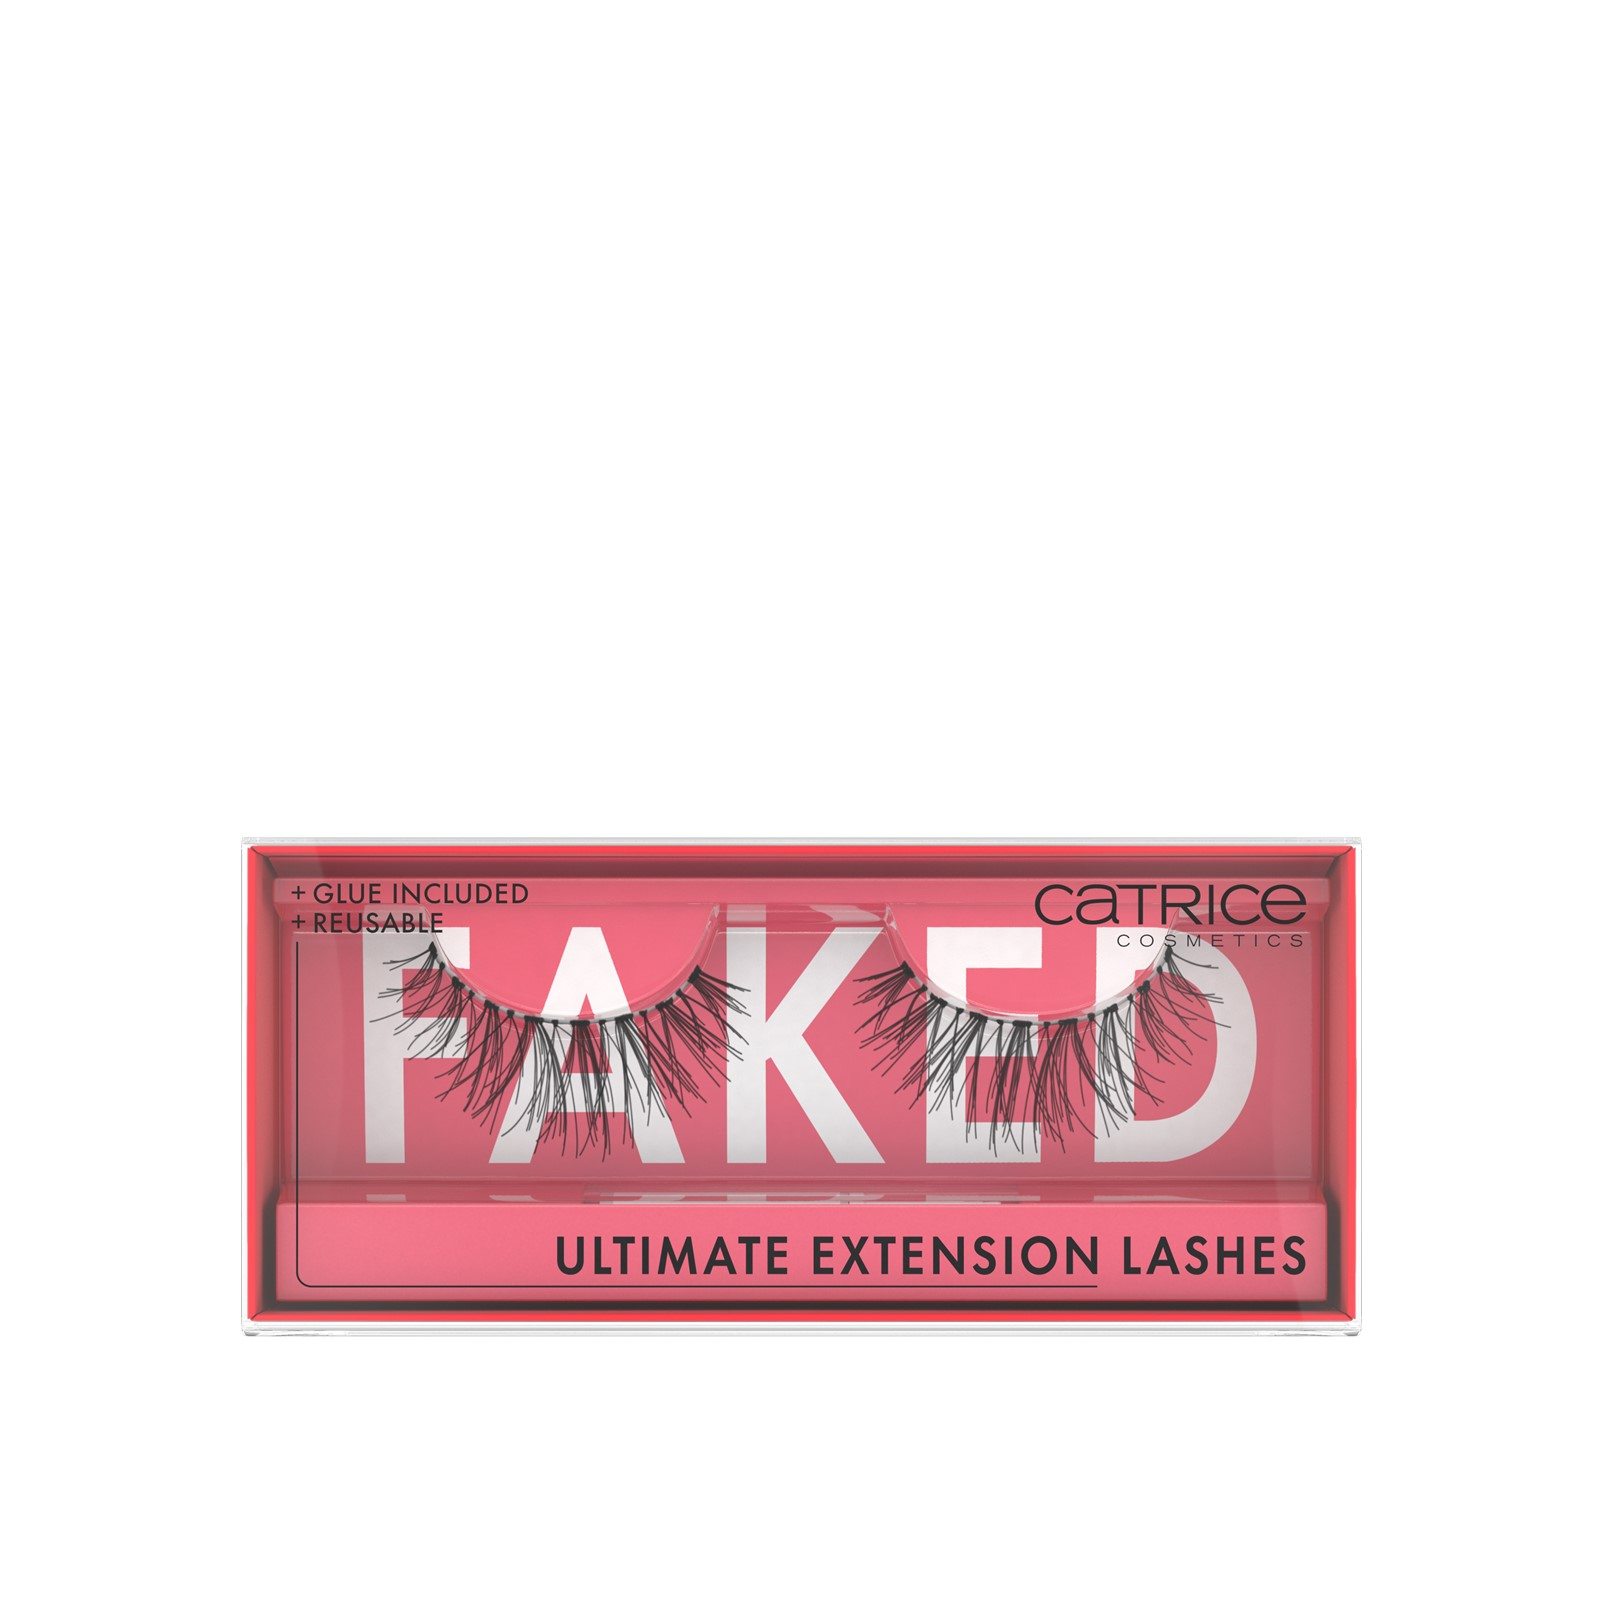 Buy Catrice Faked Ultimate Extension Lashes x1 Pair · USA